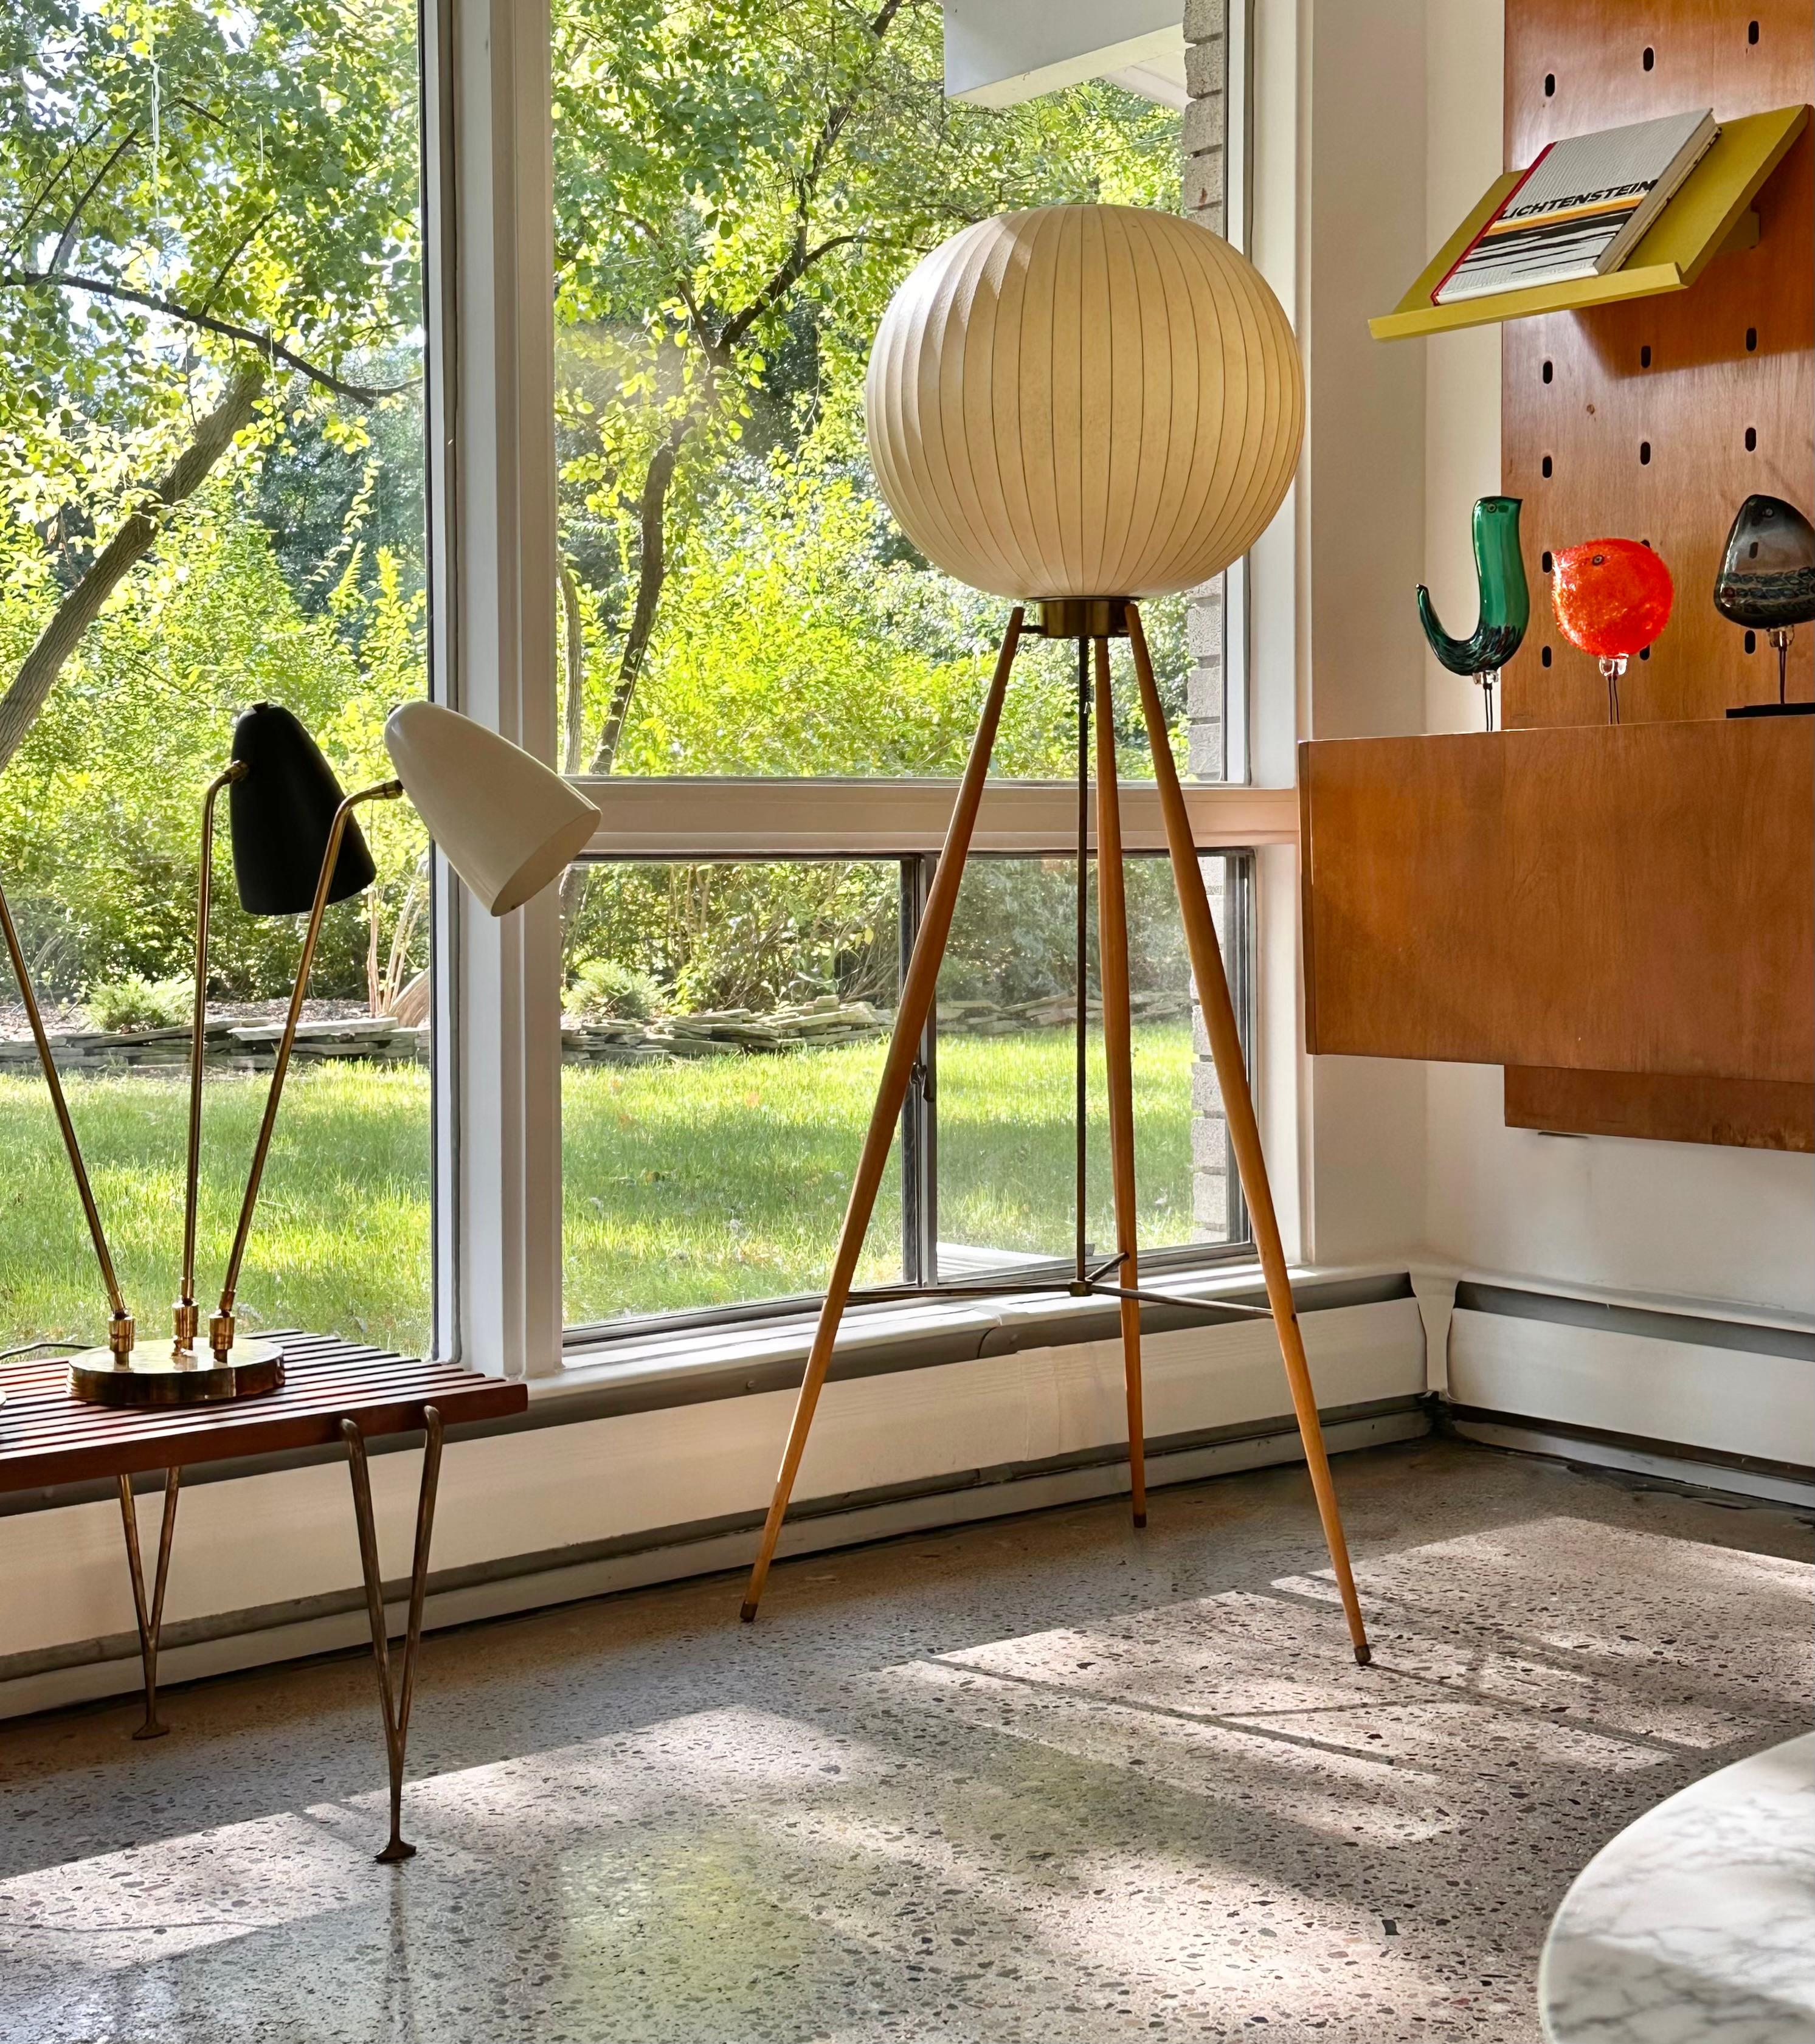 Extremely rare floor lamp designed by George Nelson & Associates
Offered through Howard Miller circa 1952

Tripod base in natural birch with brushed brass fittings and a round bubble lampshade with label intact

Listed as 